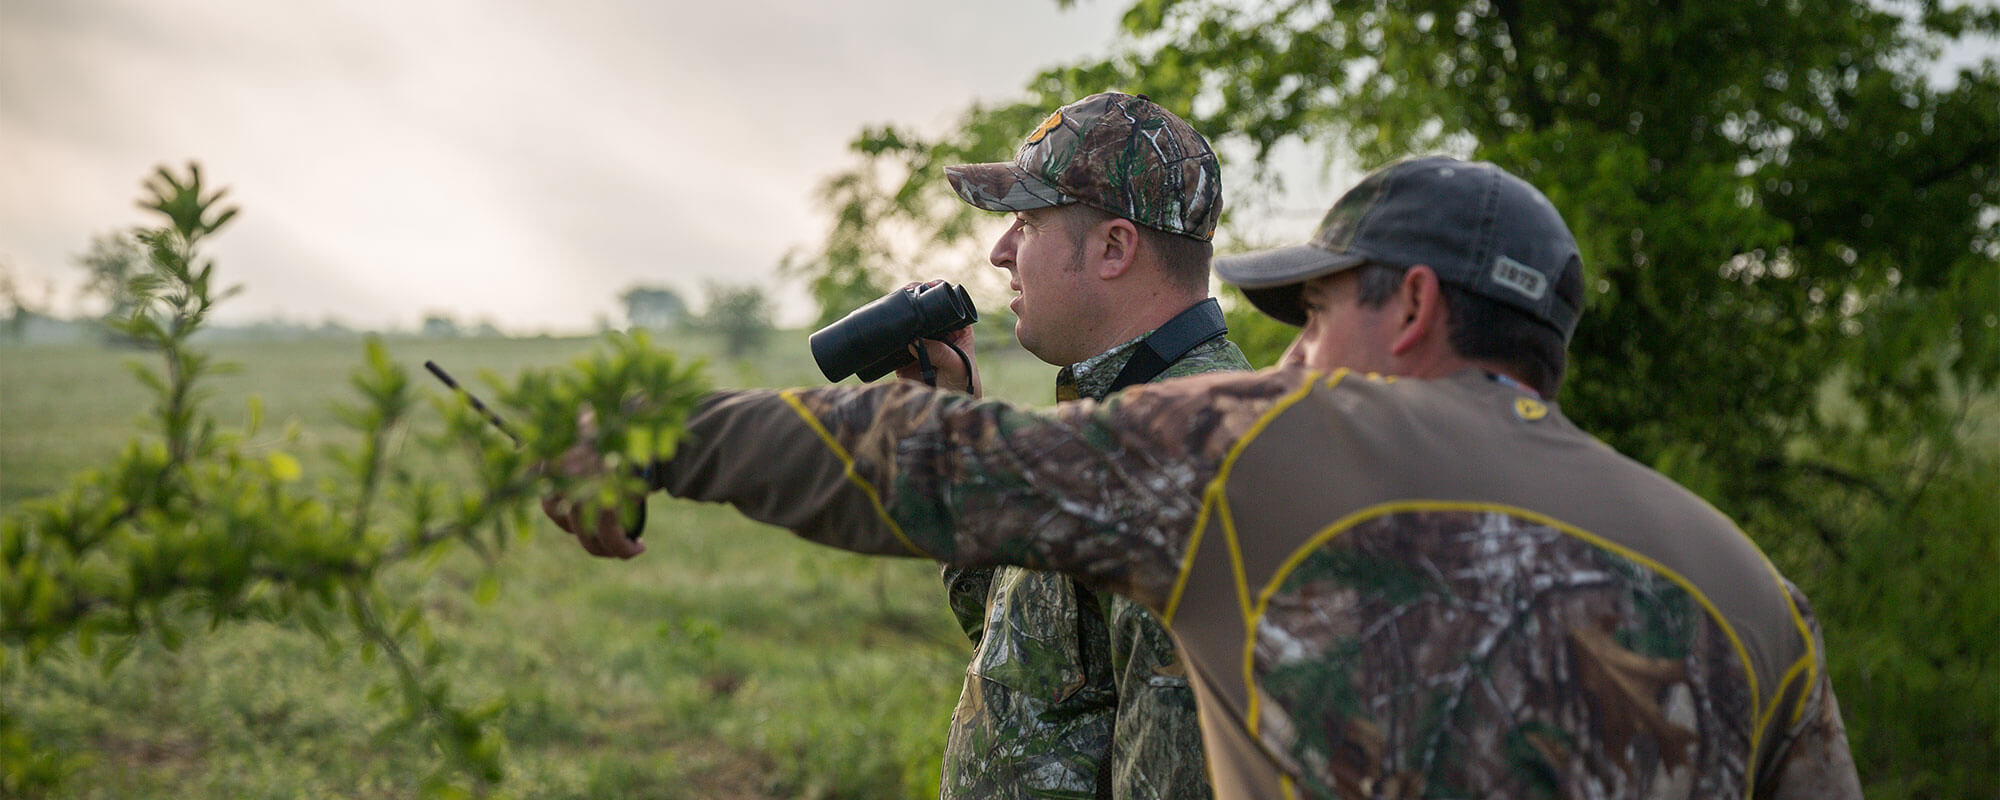 Look (and Learn) Before You Lease: Hunting Lease Do’s and Don’ts for Landowners